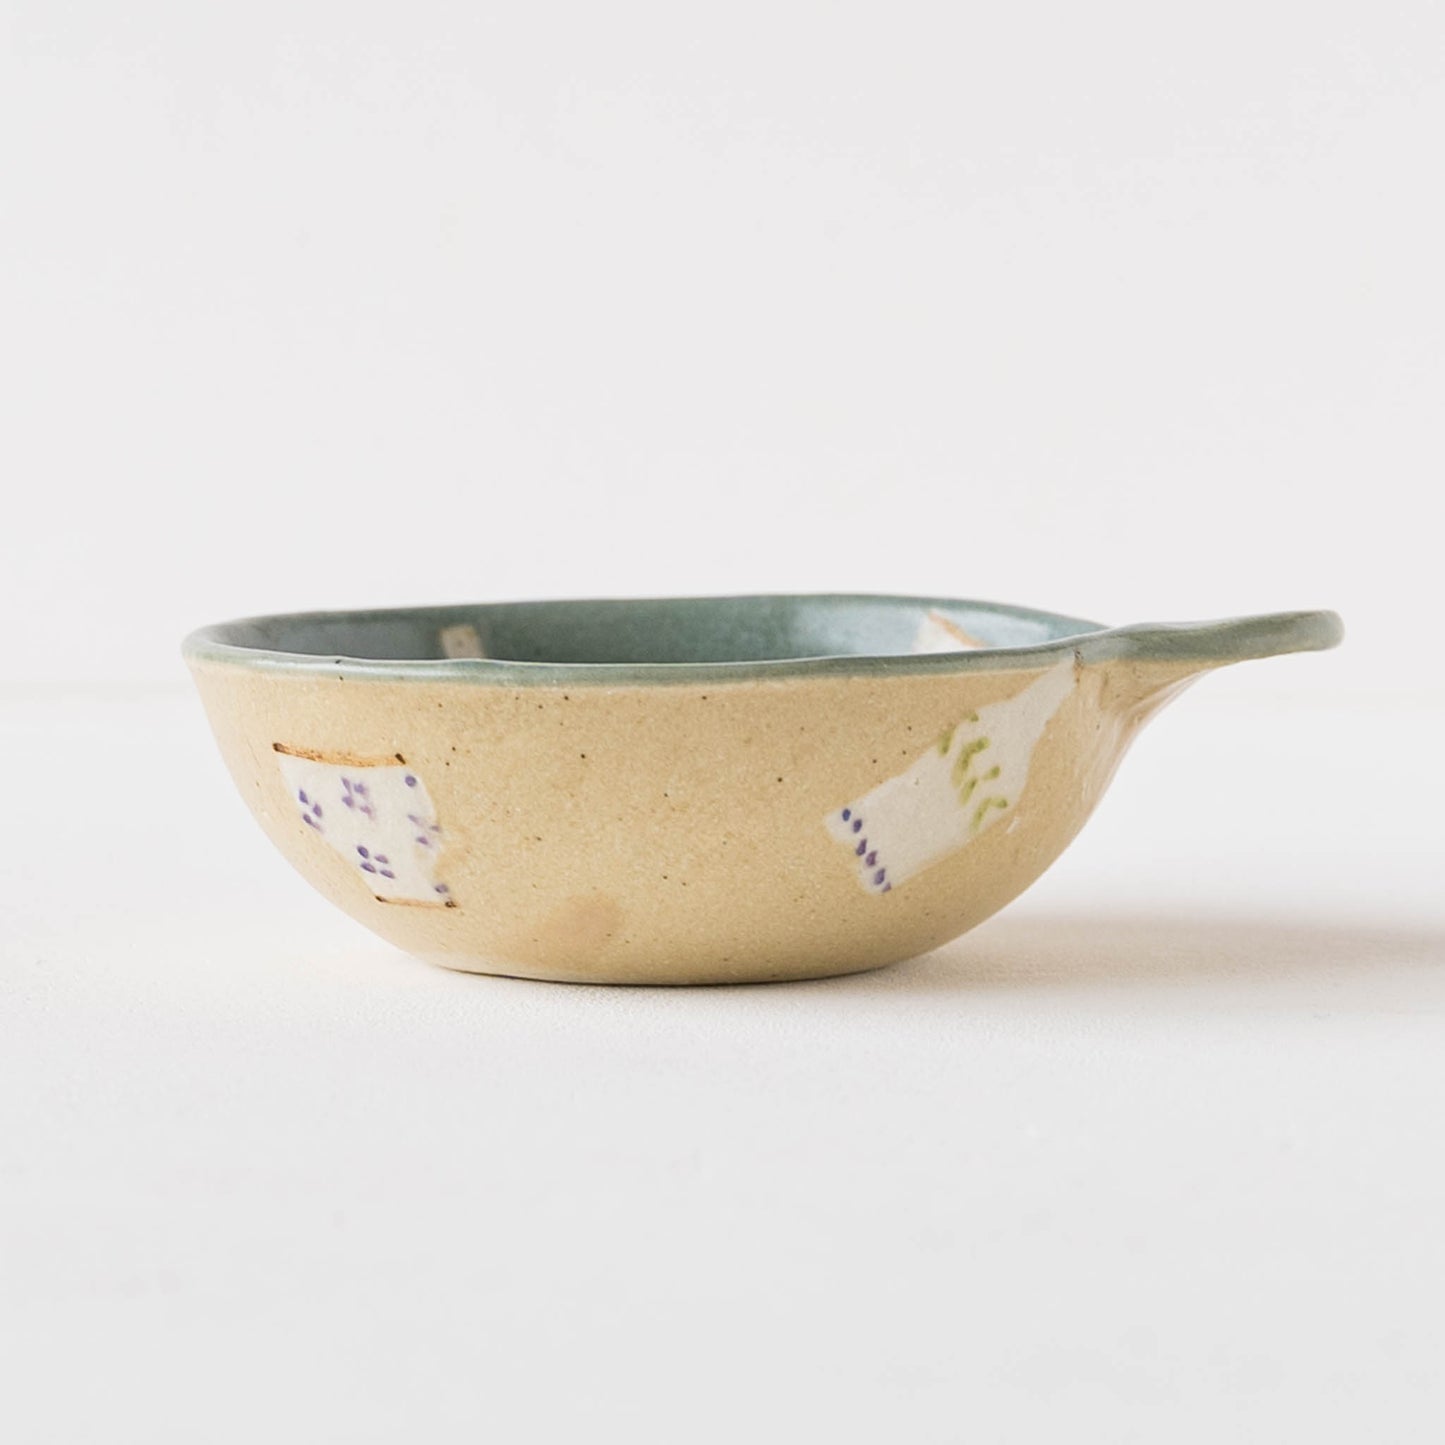 Bowl with ears colorful turquoise blue x light brown | Haruko Harada